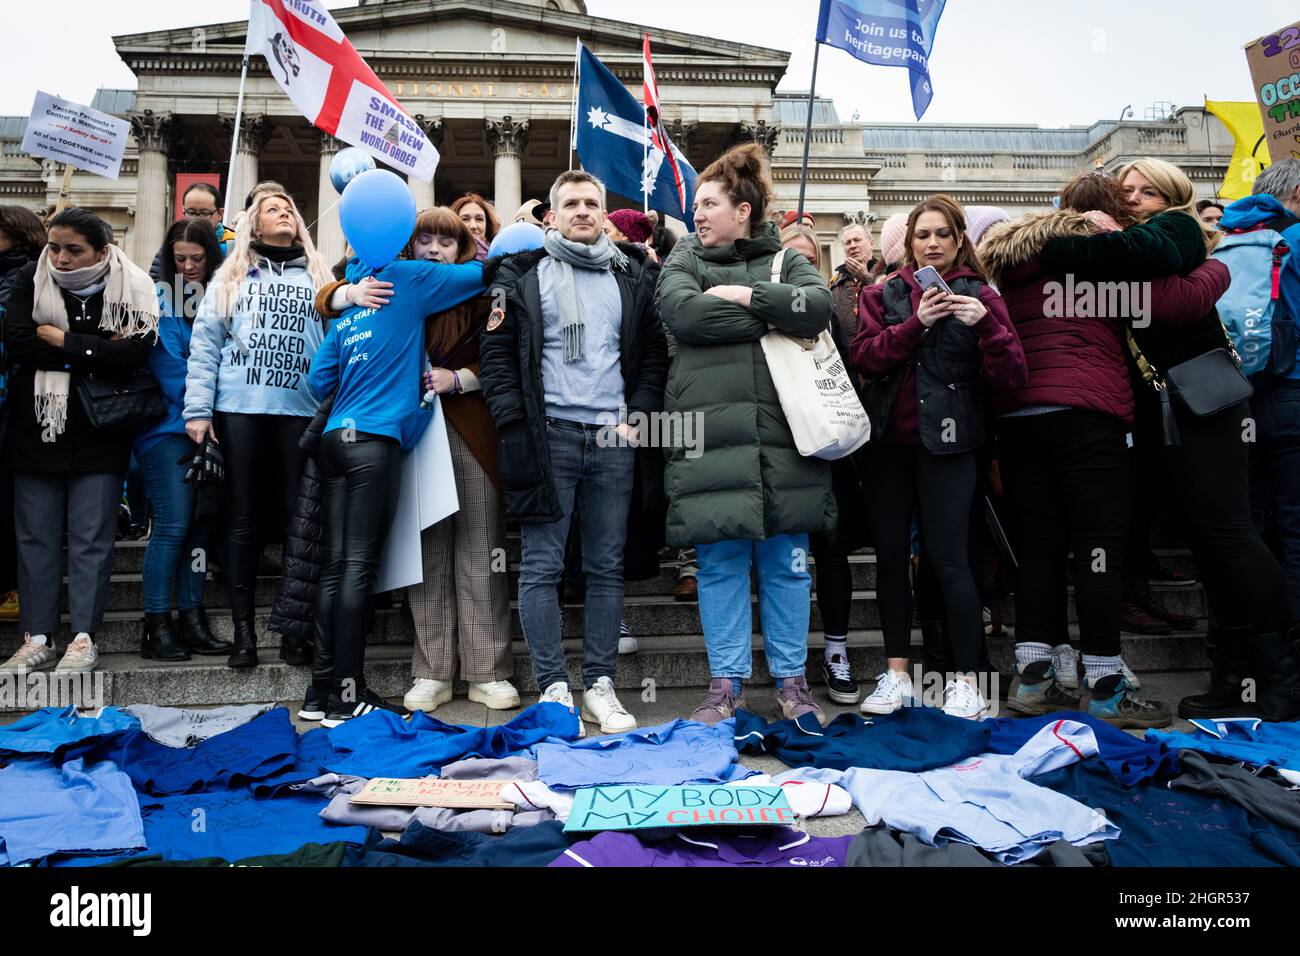 London, UK. 22nd Jan, 2022. As the mandate to get vaccinated against COVID-19 draws ever closer NHS workers join the protest. The anti-lockdown demonstration was organised by the World Wide Rally For Freedom movement. Credit: Andy Barton/Alamy Live News Stock Photo